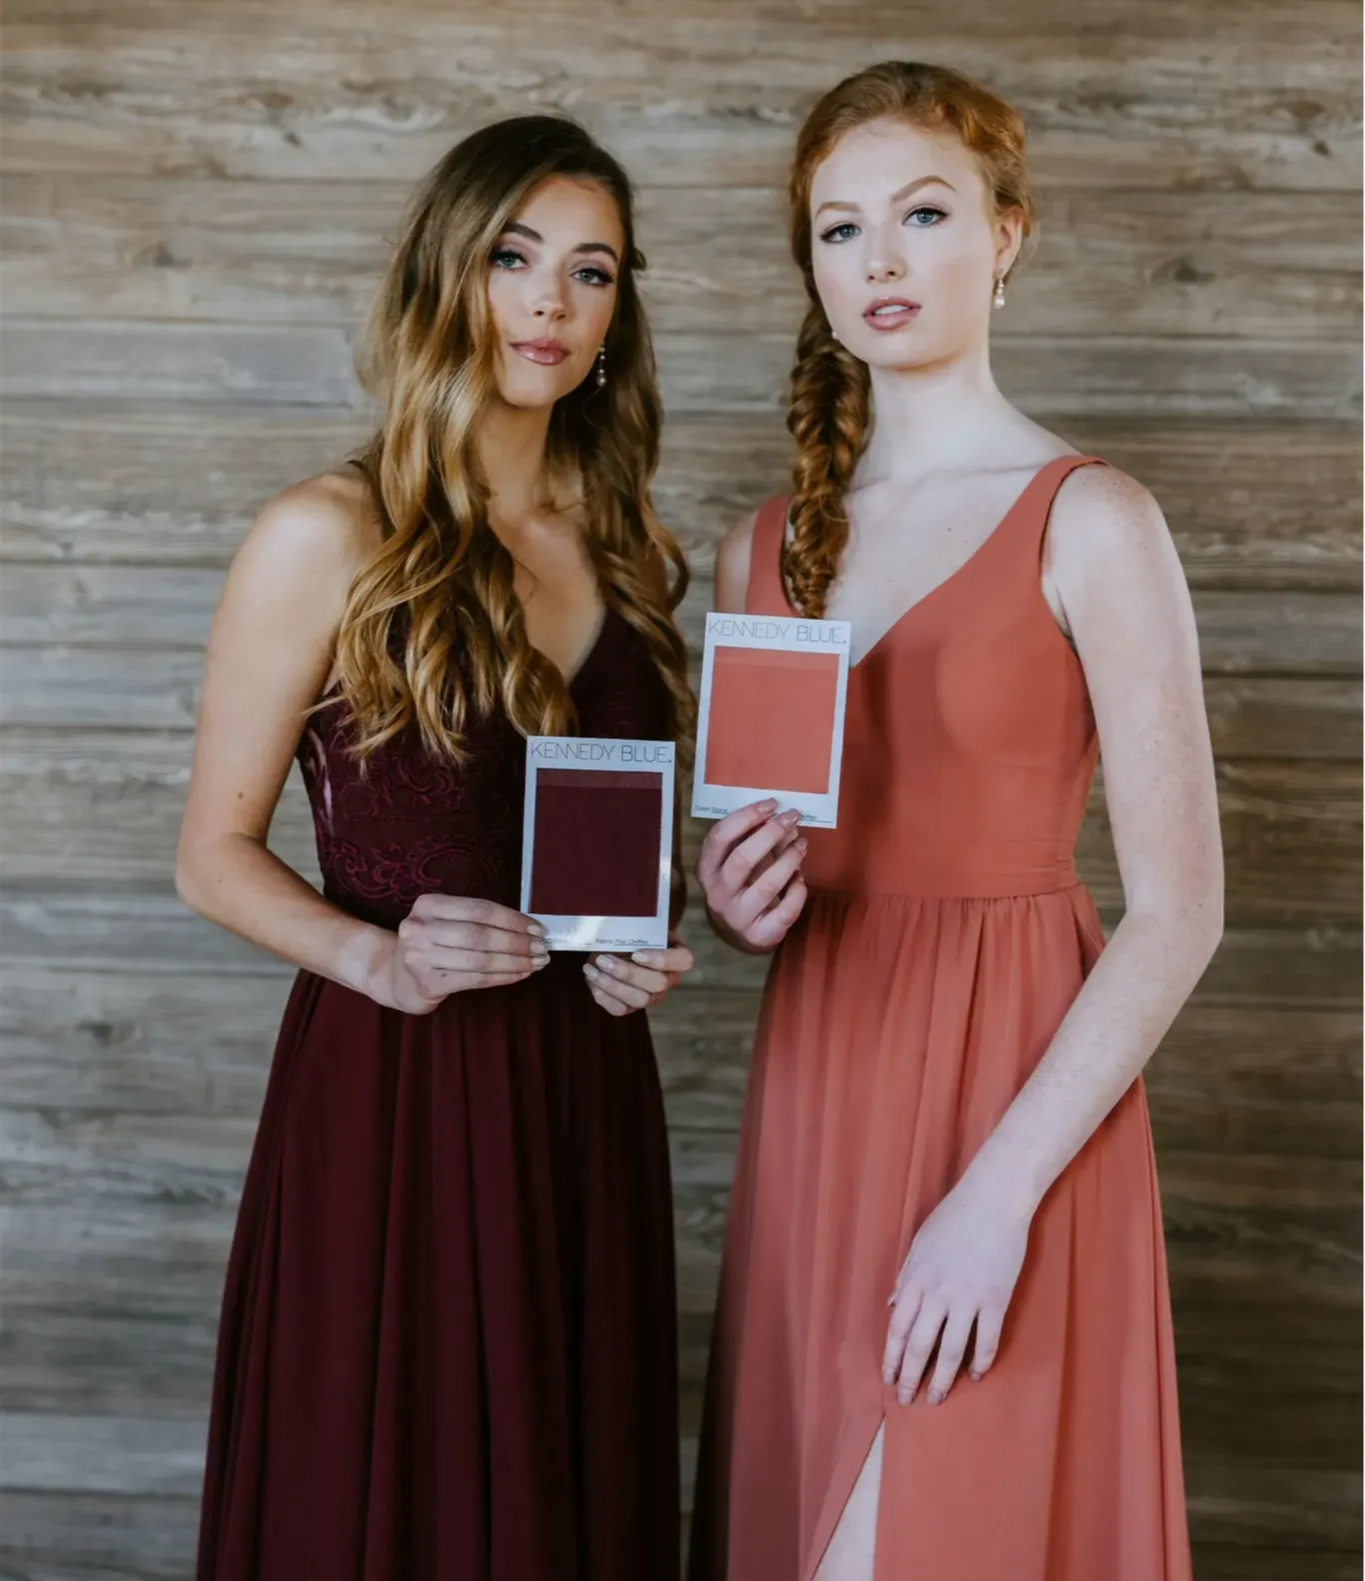 Bordeaux and Spice Bridesmaid Dresses with Matching Swatches